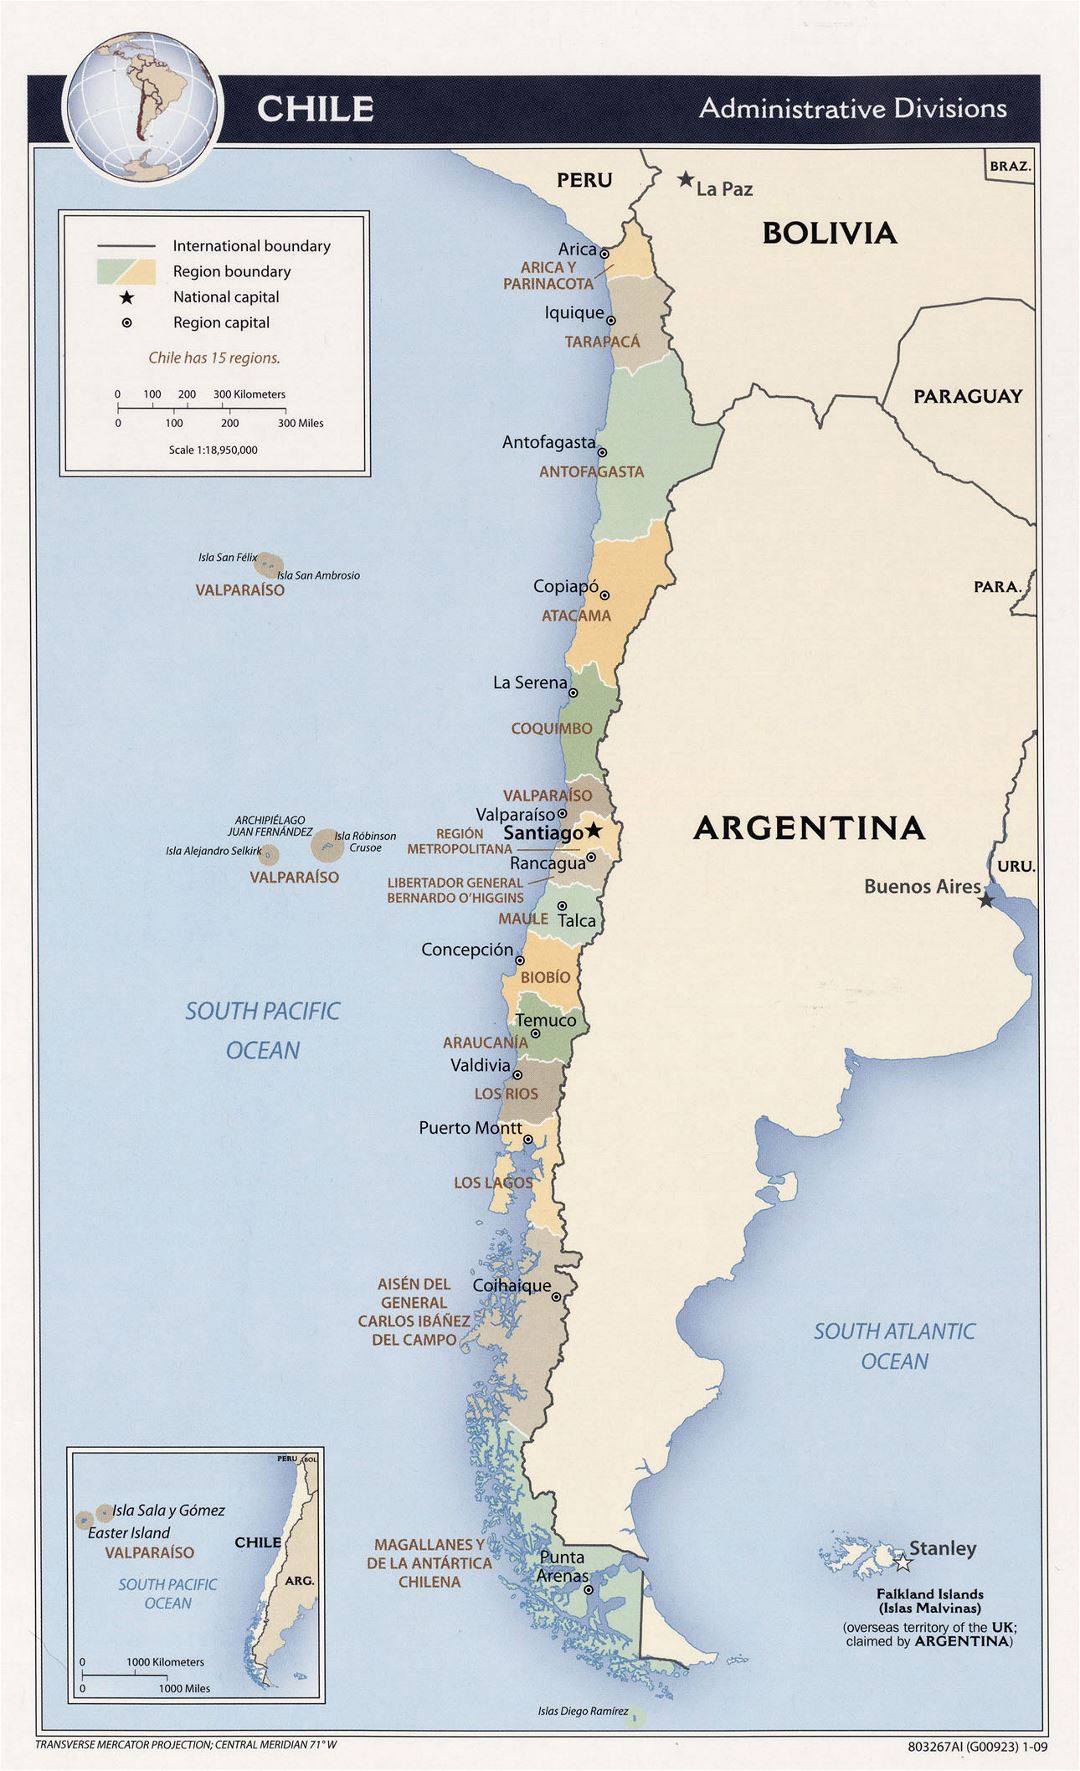 Detailed administrative divisions map of Chile - 2009